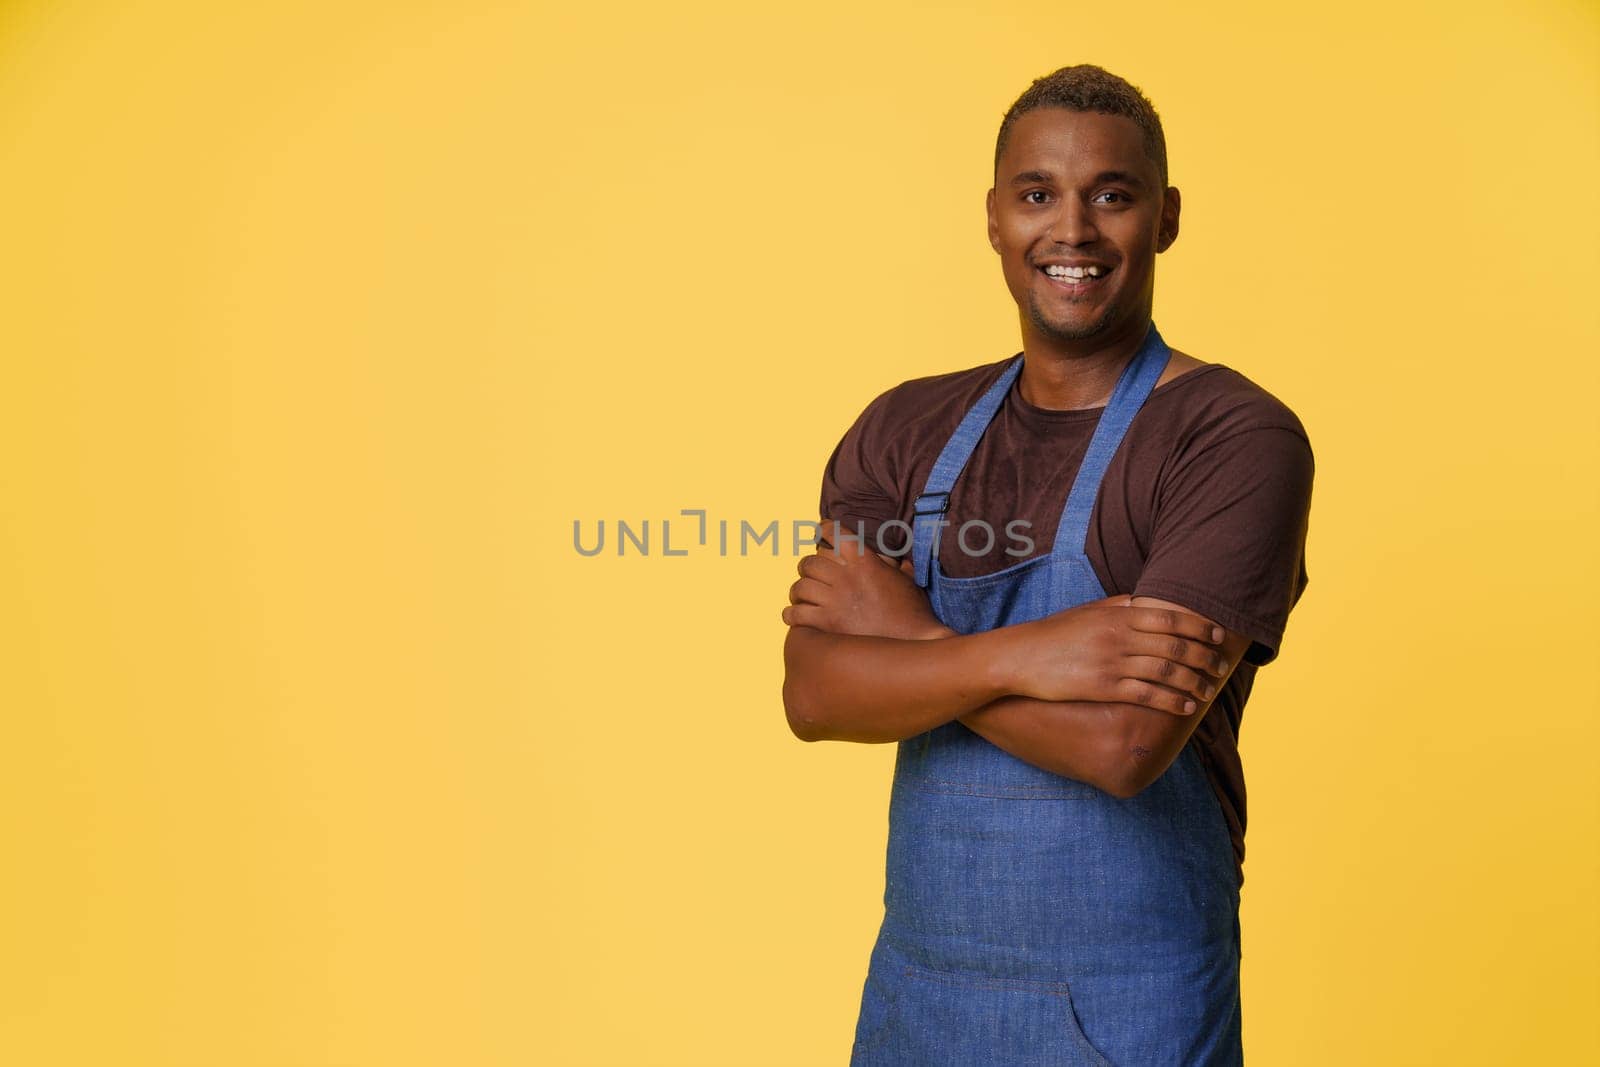 Cheerful African American cook wearing blue apron smiles in front of yellow background with copy space, suggesting concept of professional cook or chef in culinary or kitchen-related profession. High quality photo